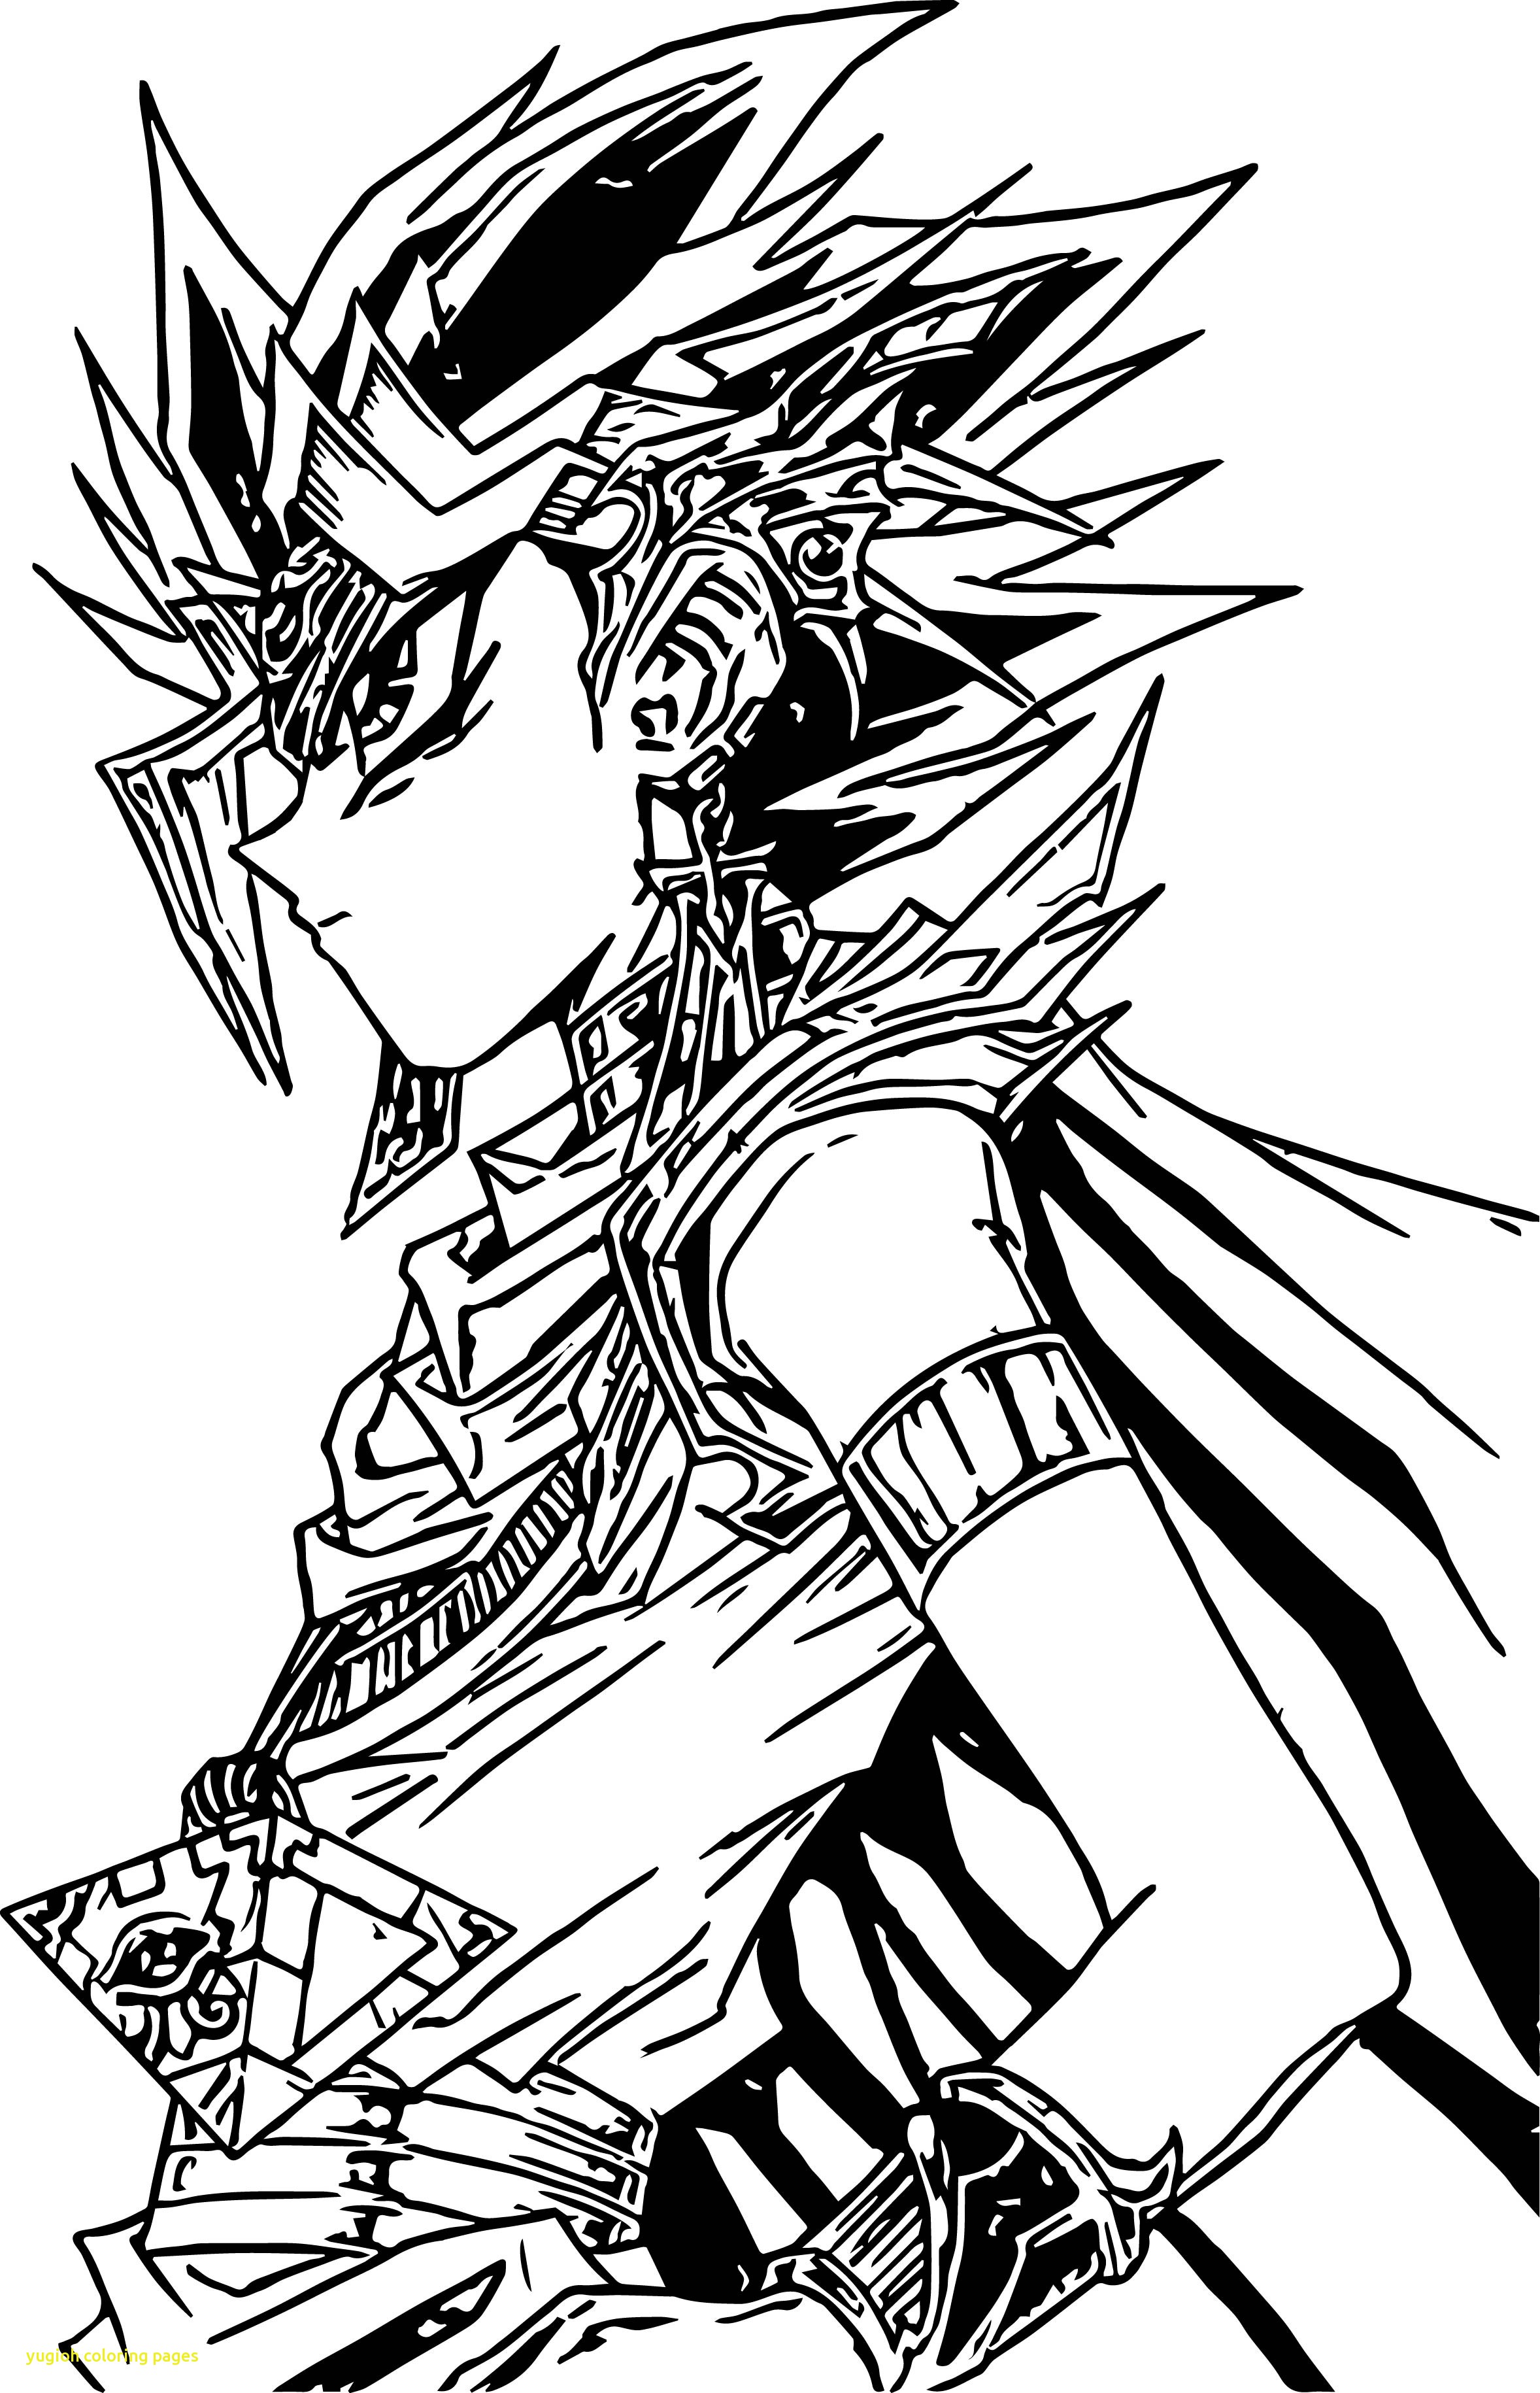 Yugioh Printable Coloring Pages At GetColorings Free Printable Colorings Pages To Print